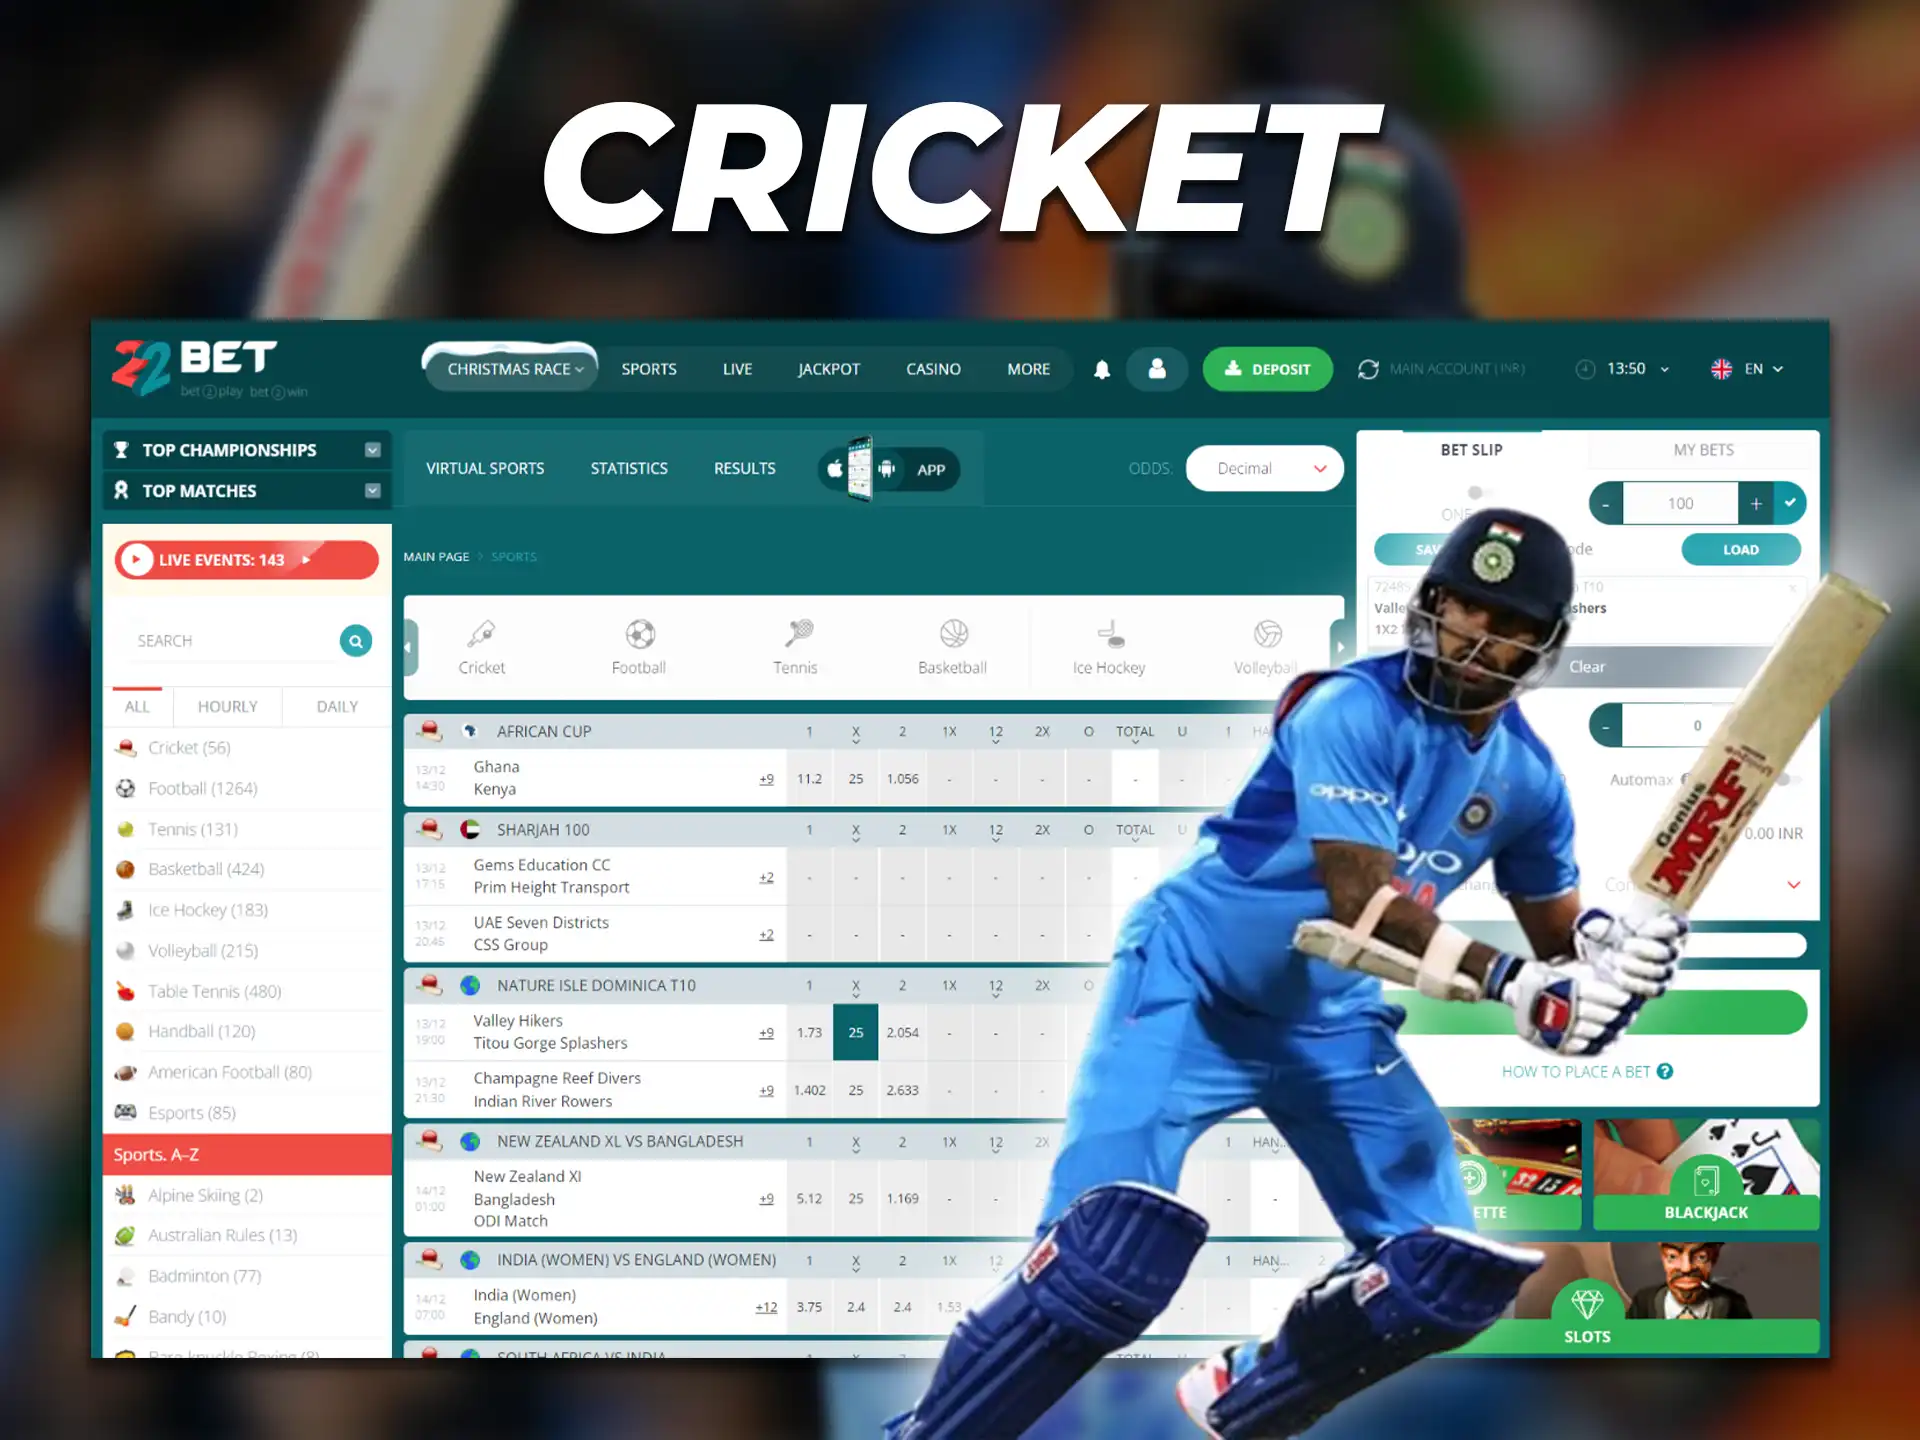 A wide range of markets and cricket betting at 22Bet.